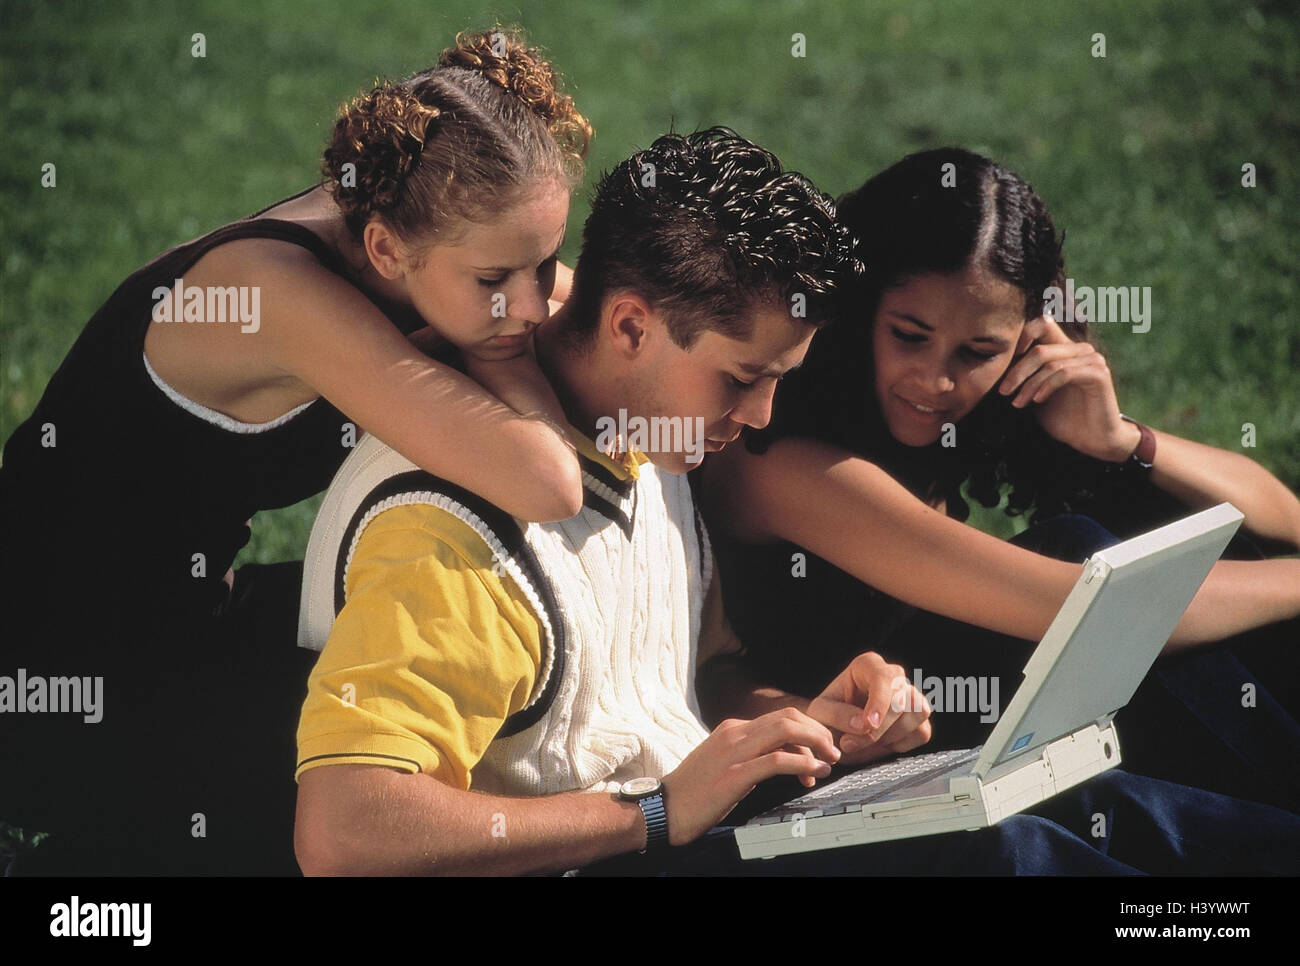 Meadow, teenager, man, young, laptop, input summer, schoolboy, student, young persons, computers, notebook computer, enter, tap, data entry, leisure time, outside Stock Photo